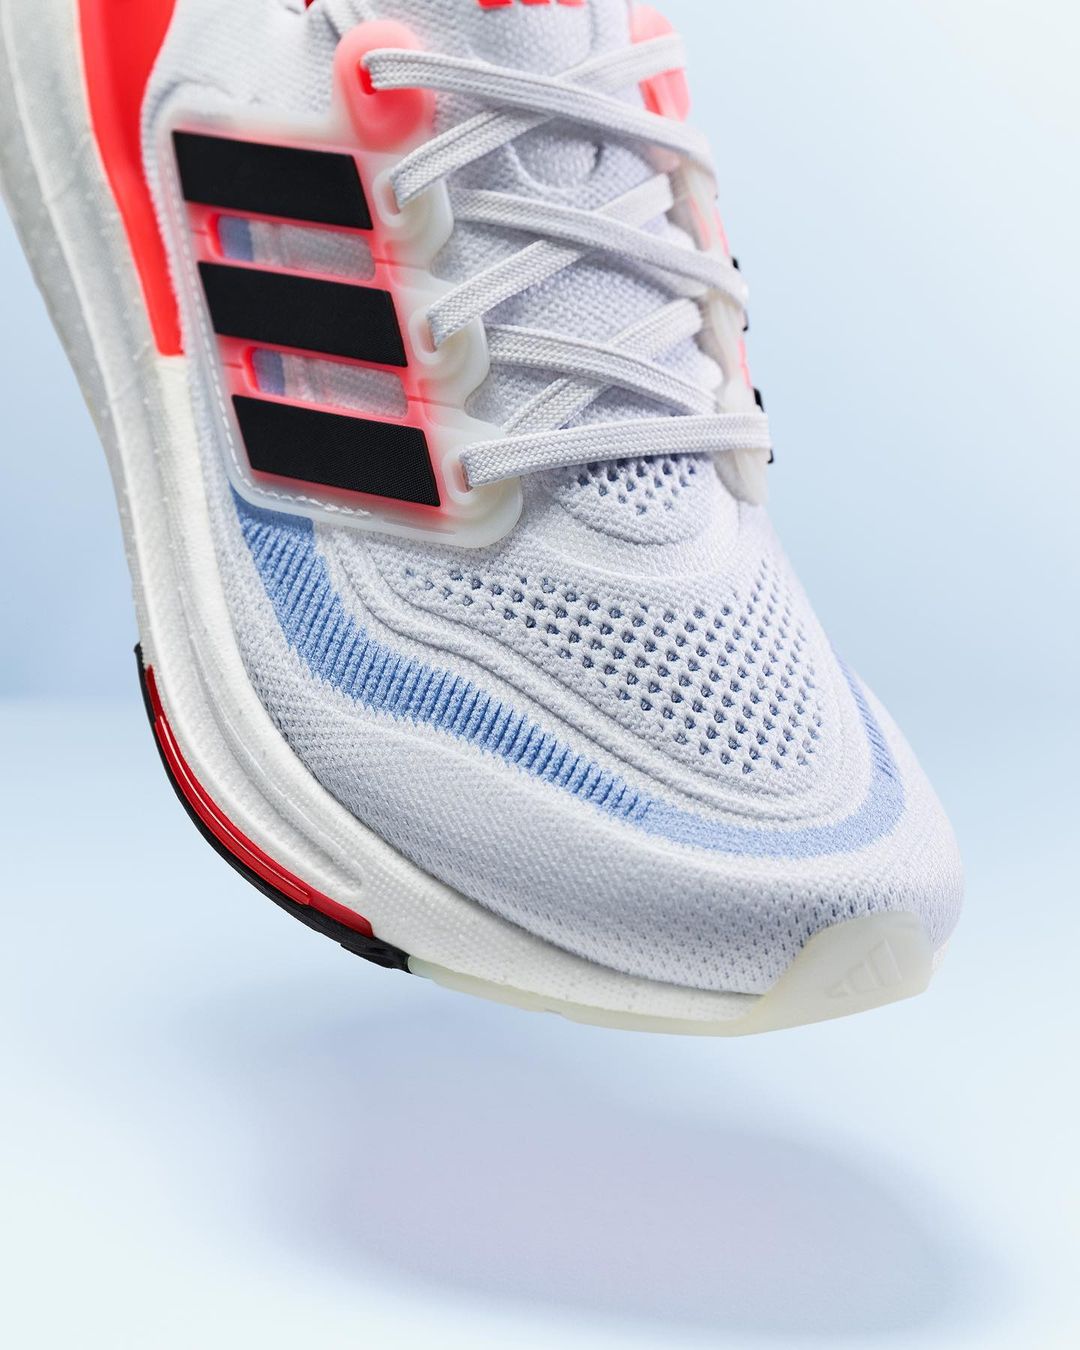 adidas launches their new Ultraboost Light